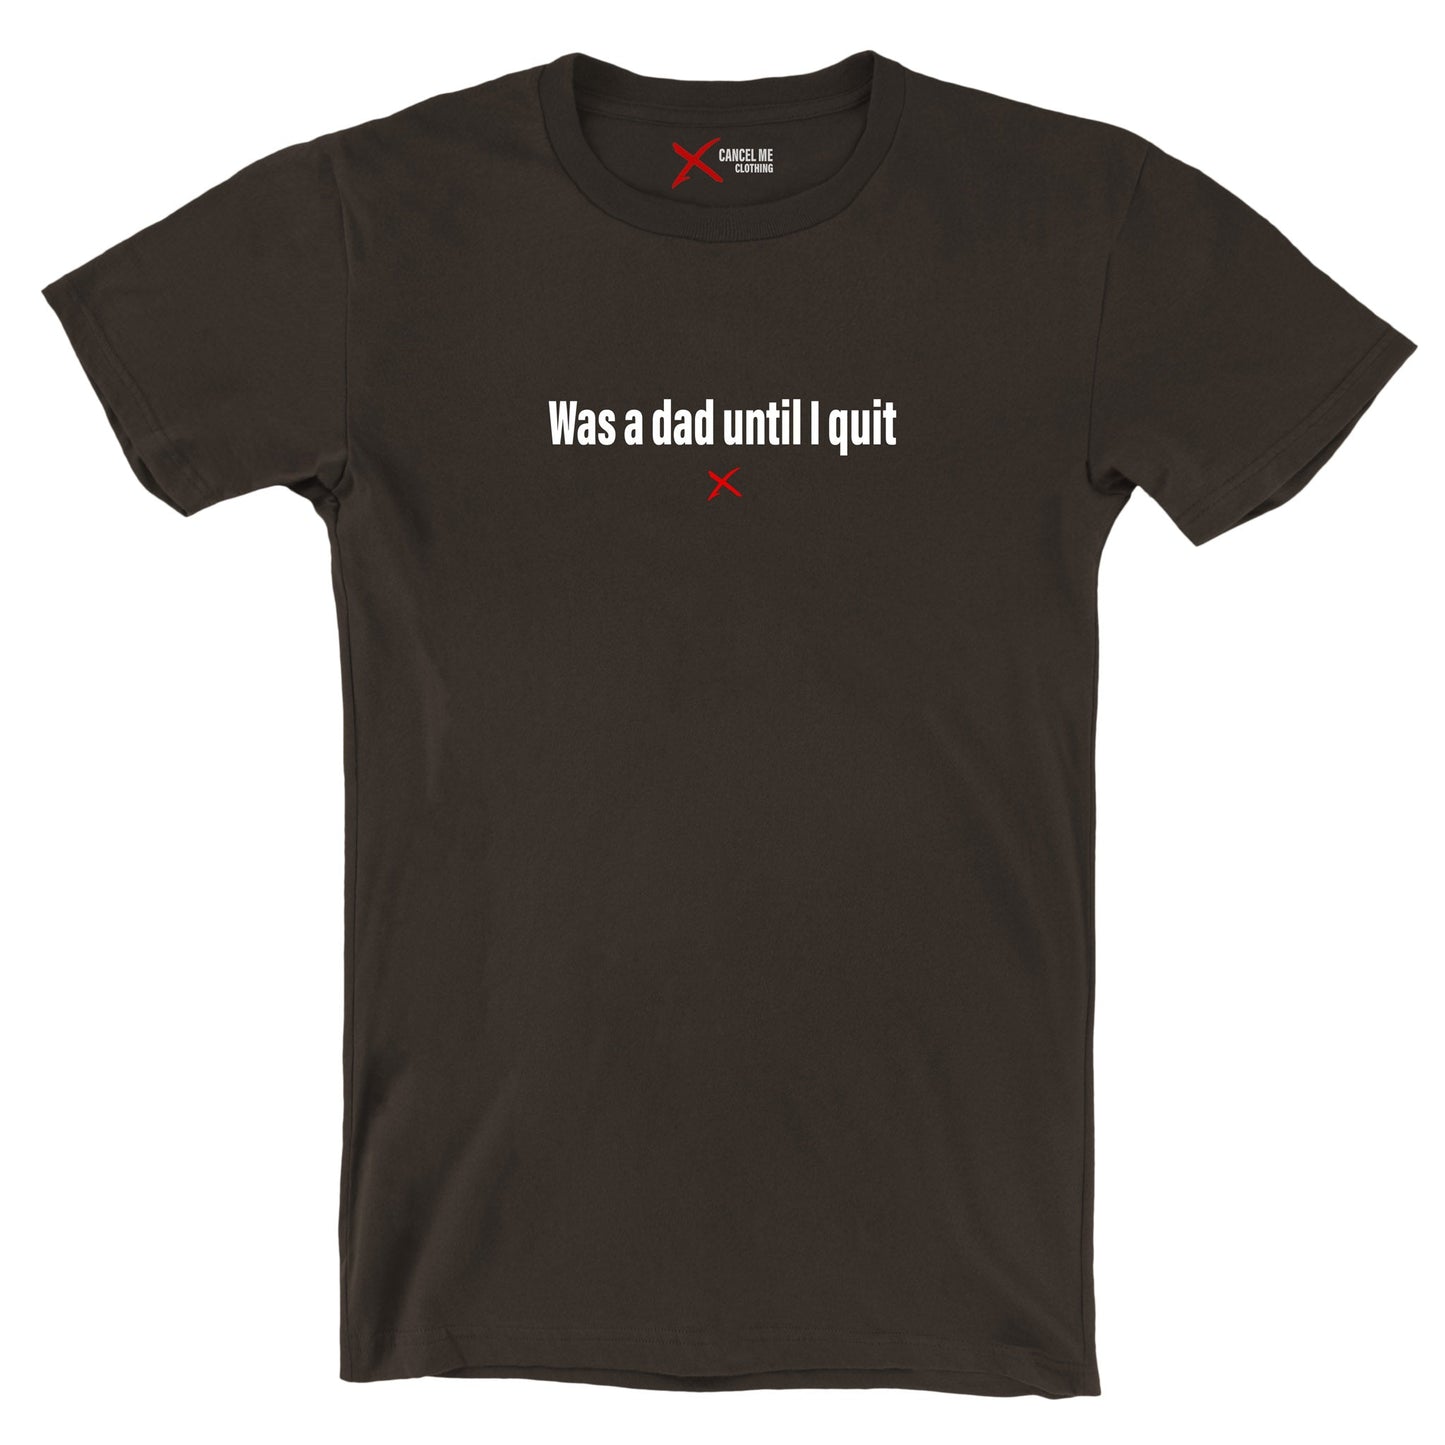 Was a dad until I quit - Shirt